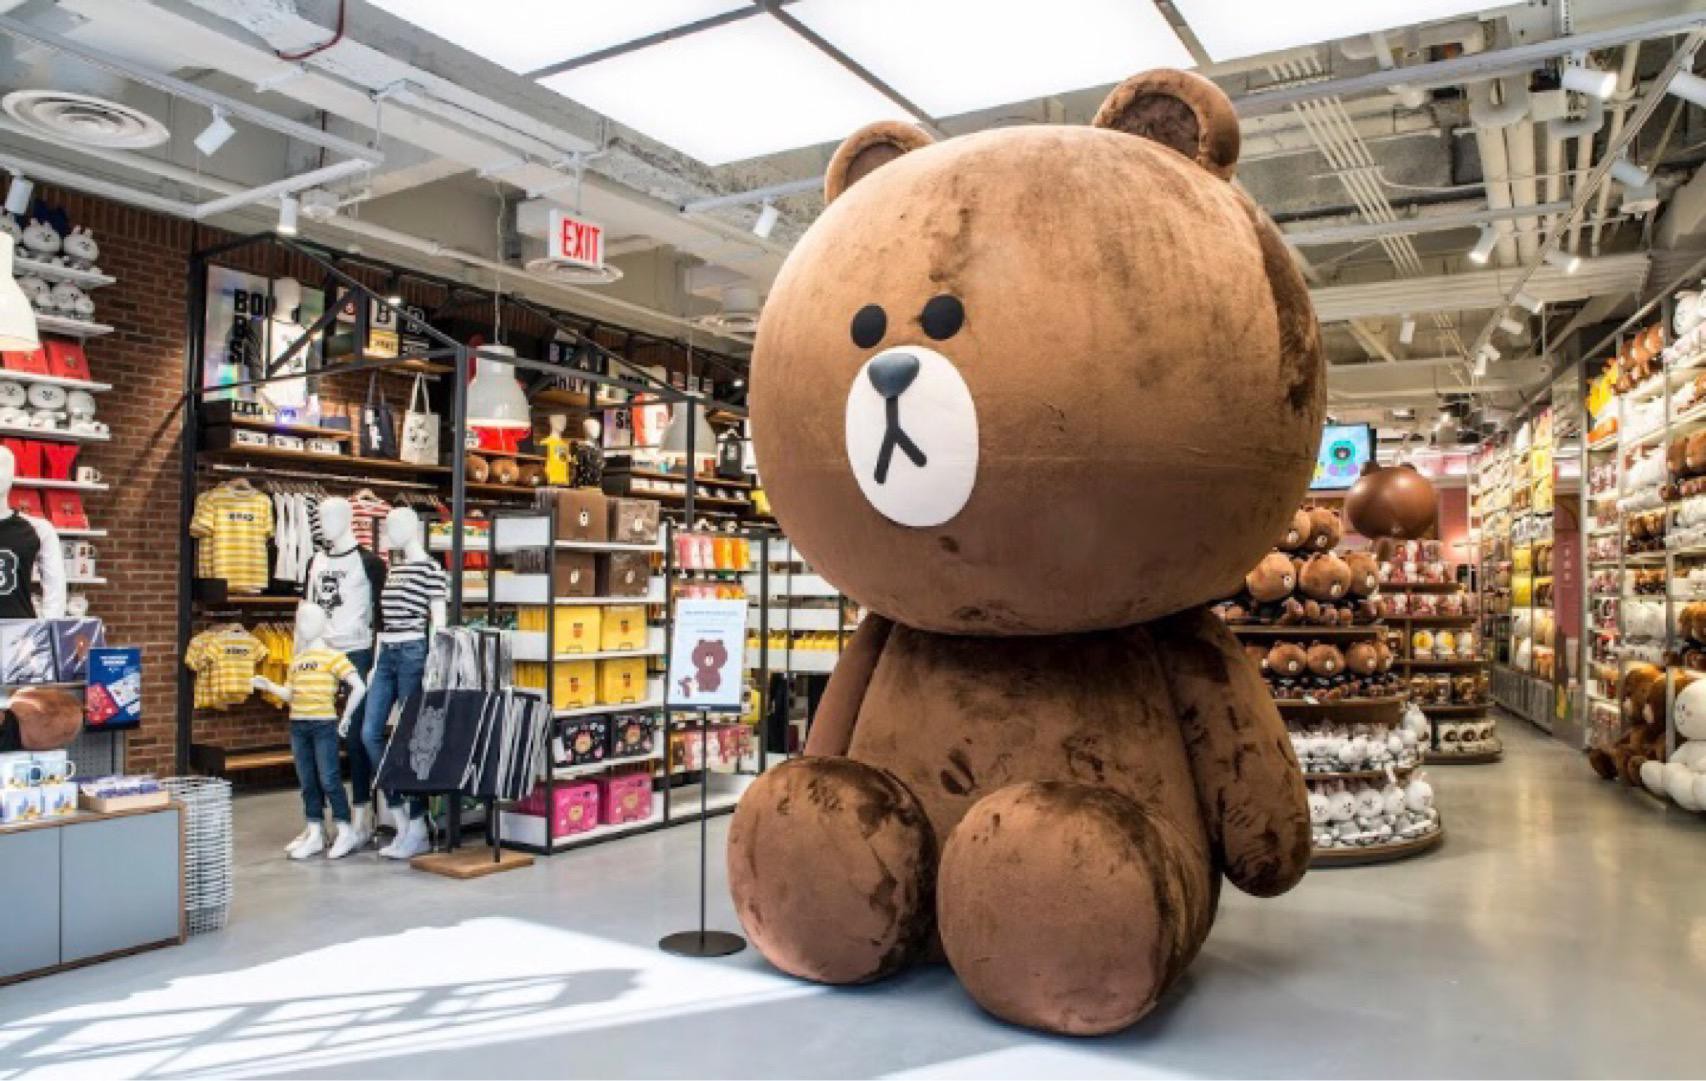 Line Friends New York Times Square Store